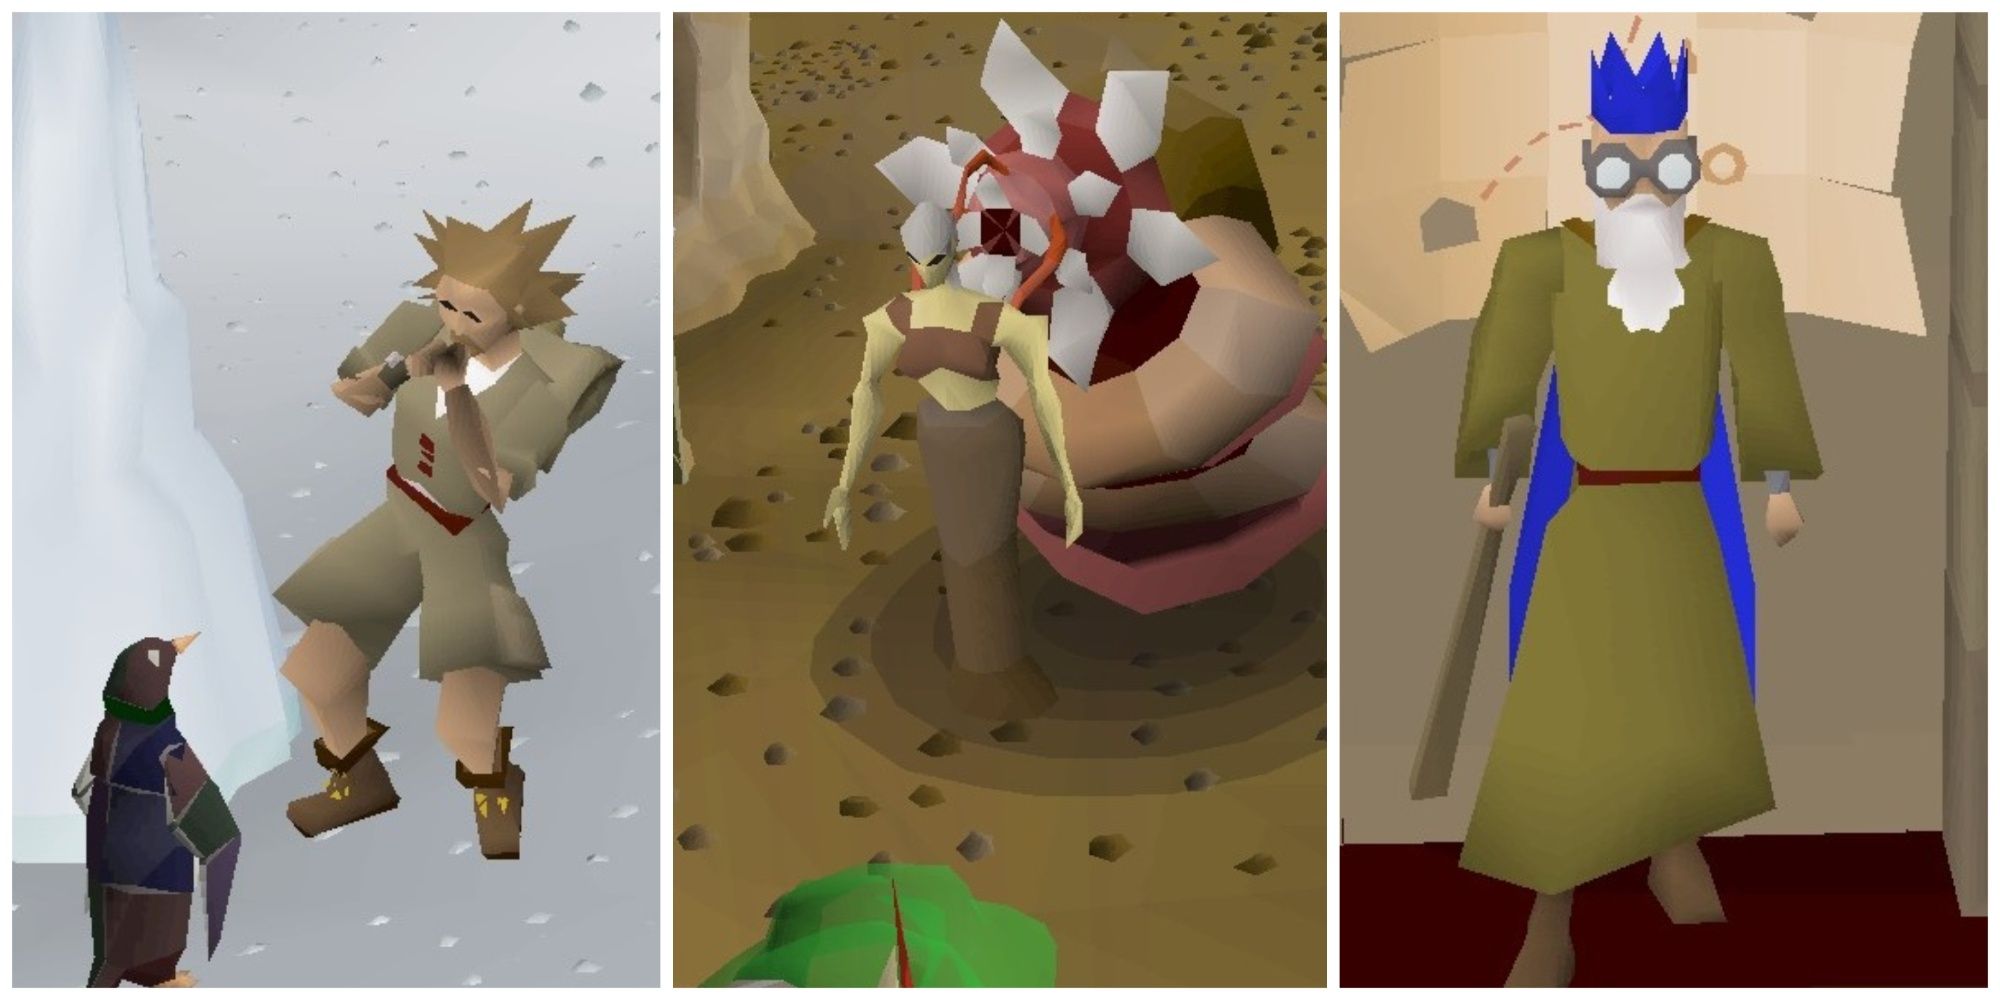 Split image showing images from Old RuneScape screenshots representing RS3 quests which should be backported (Hunt for Red Raktuber, Kennith's Concerns, and Love Story).